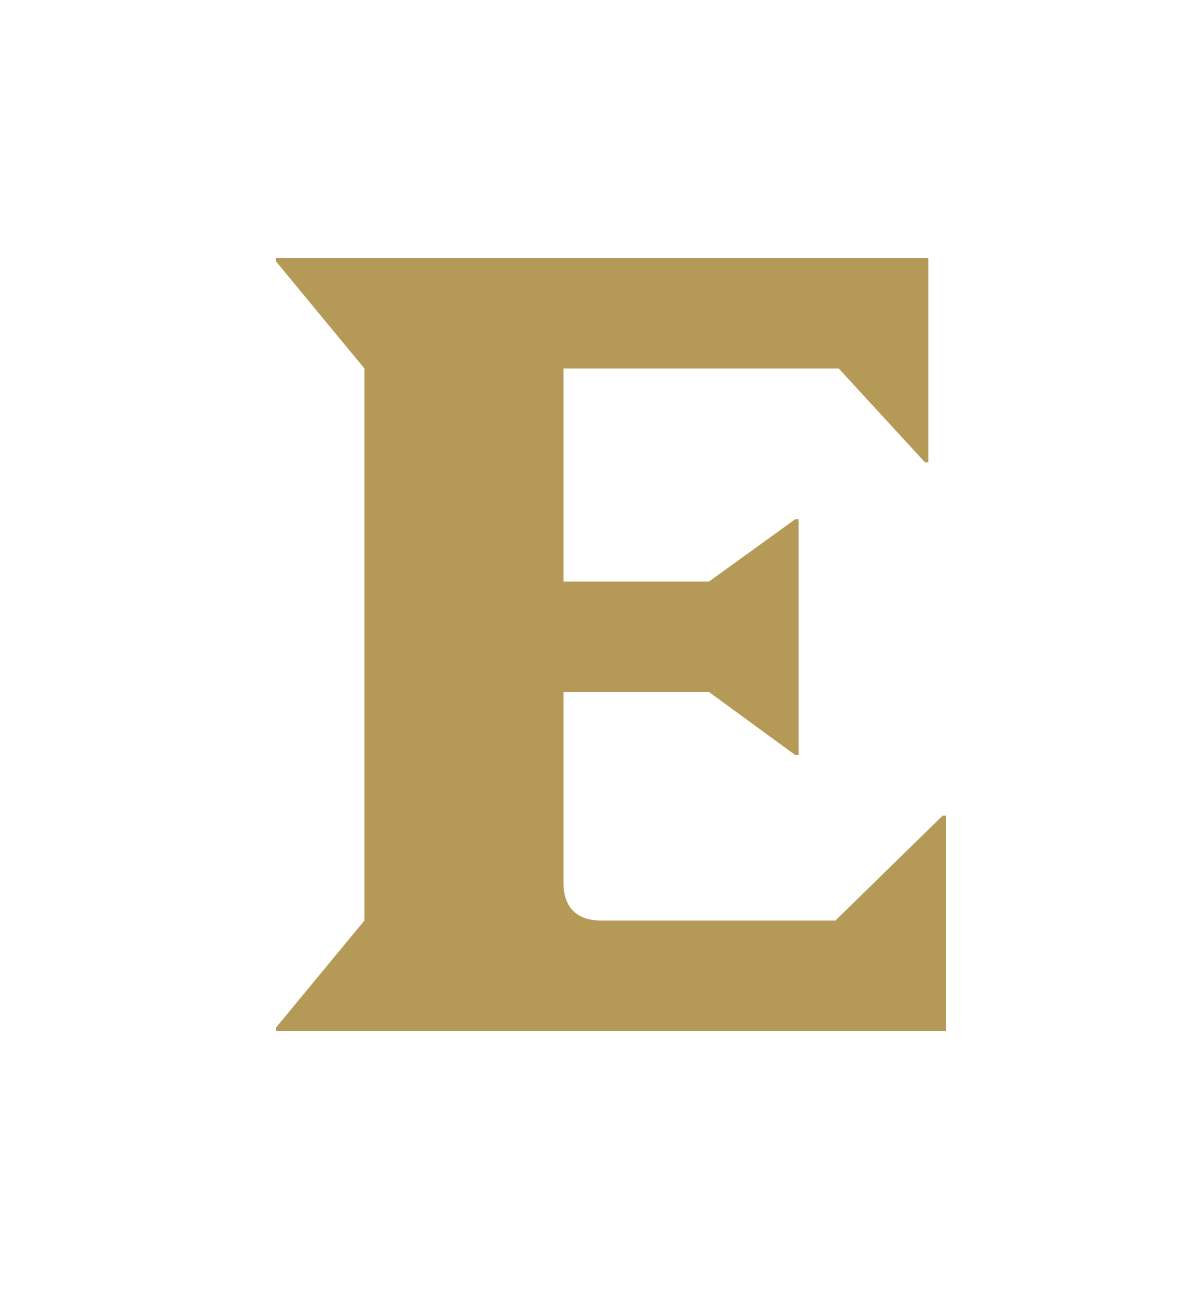 Letter E PNG